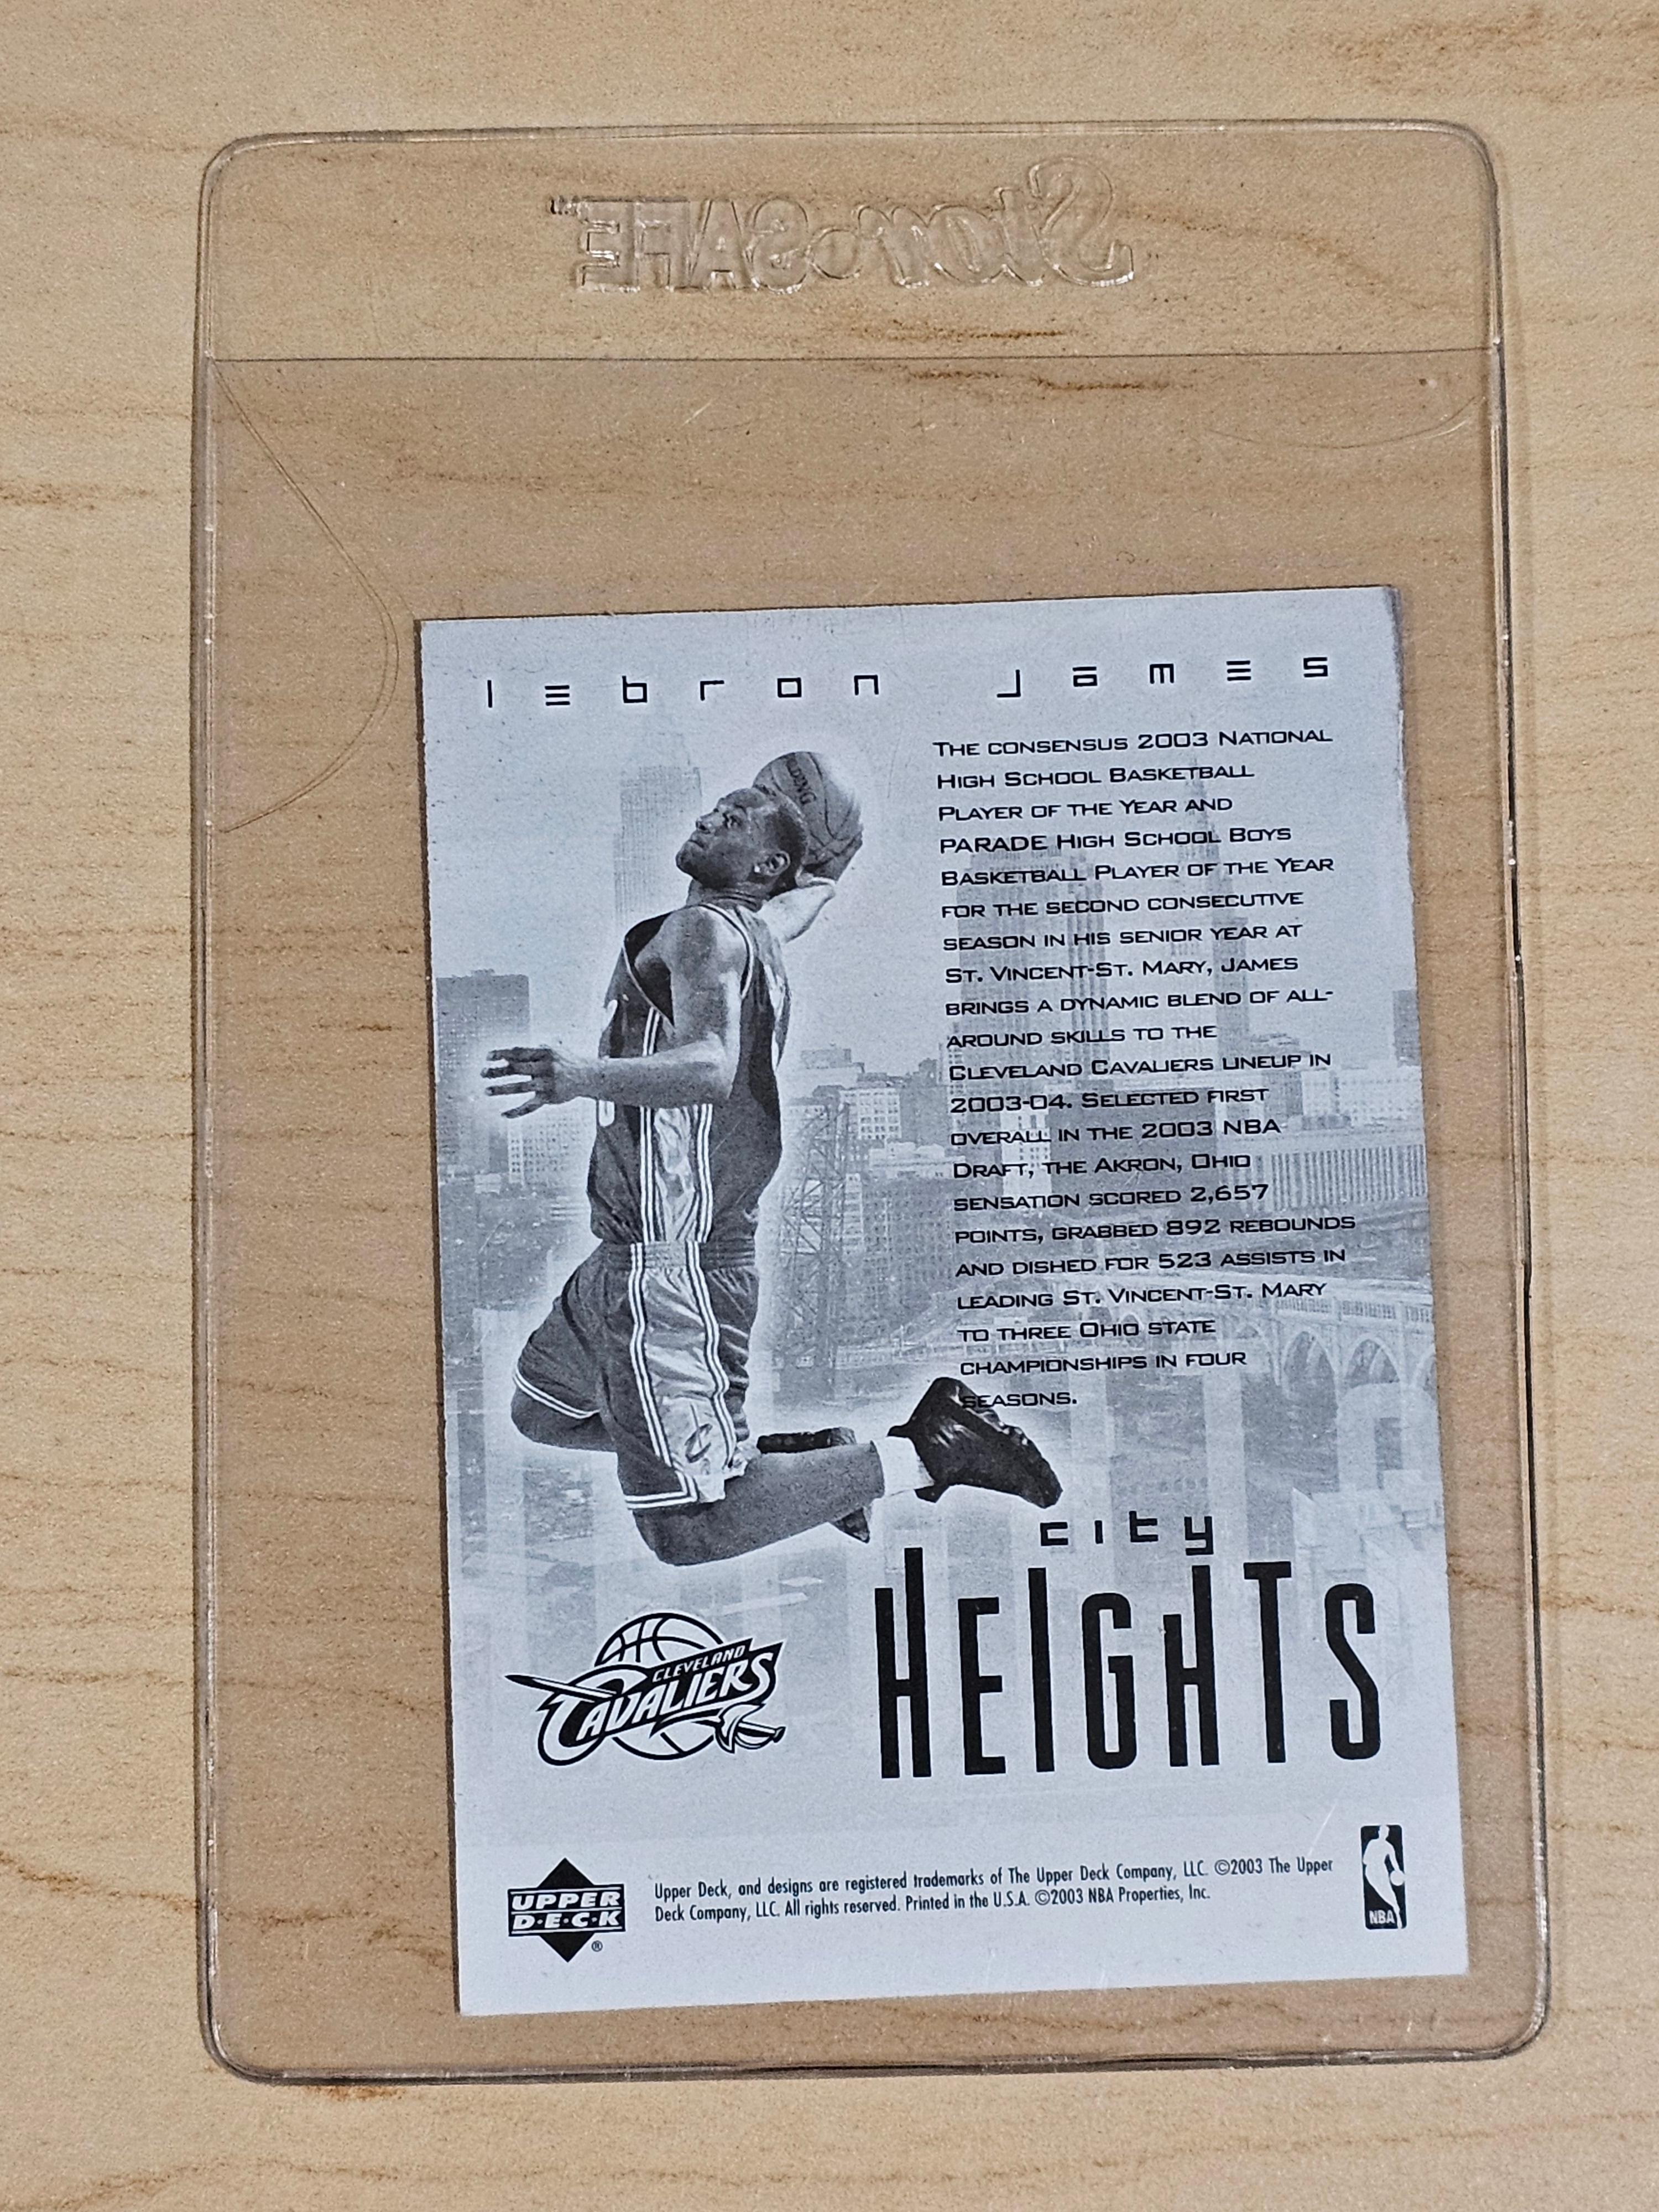 Upper Deck LeBron James City Heights Card in Plastic Protective Sleeve